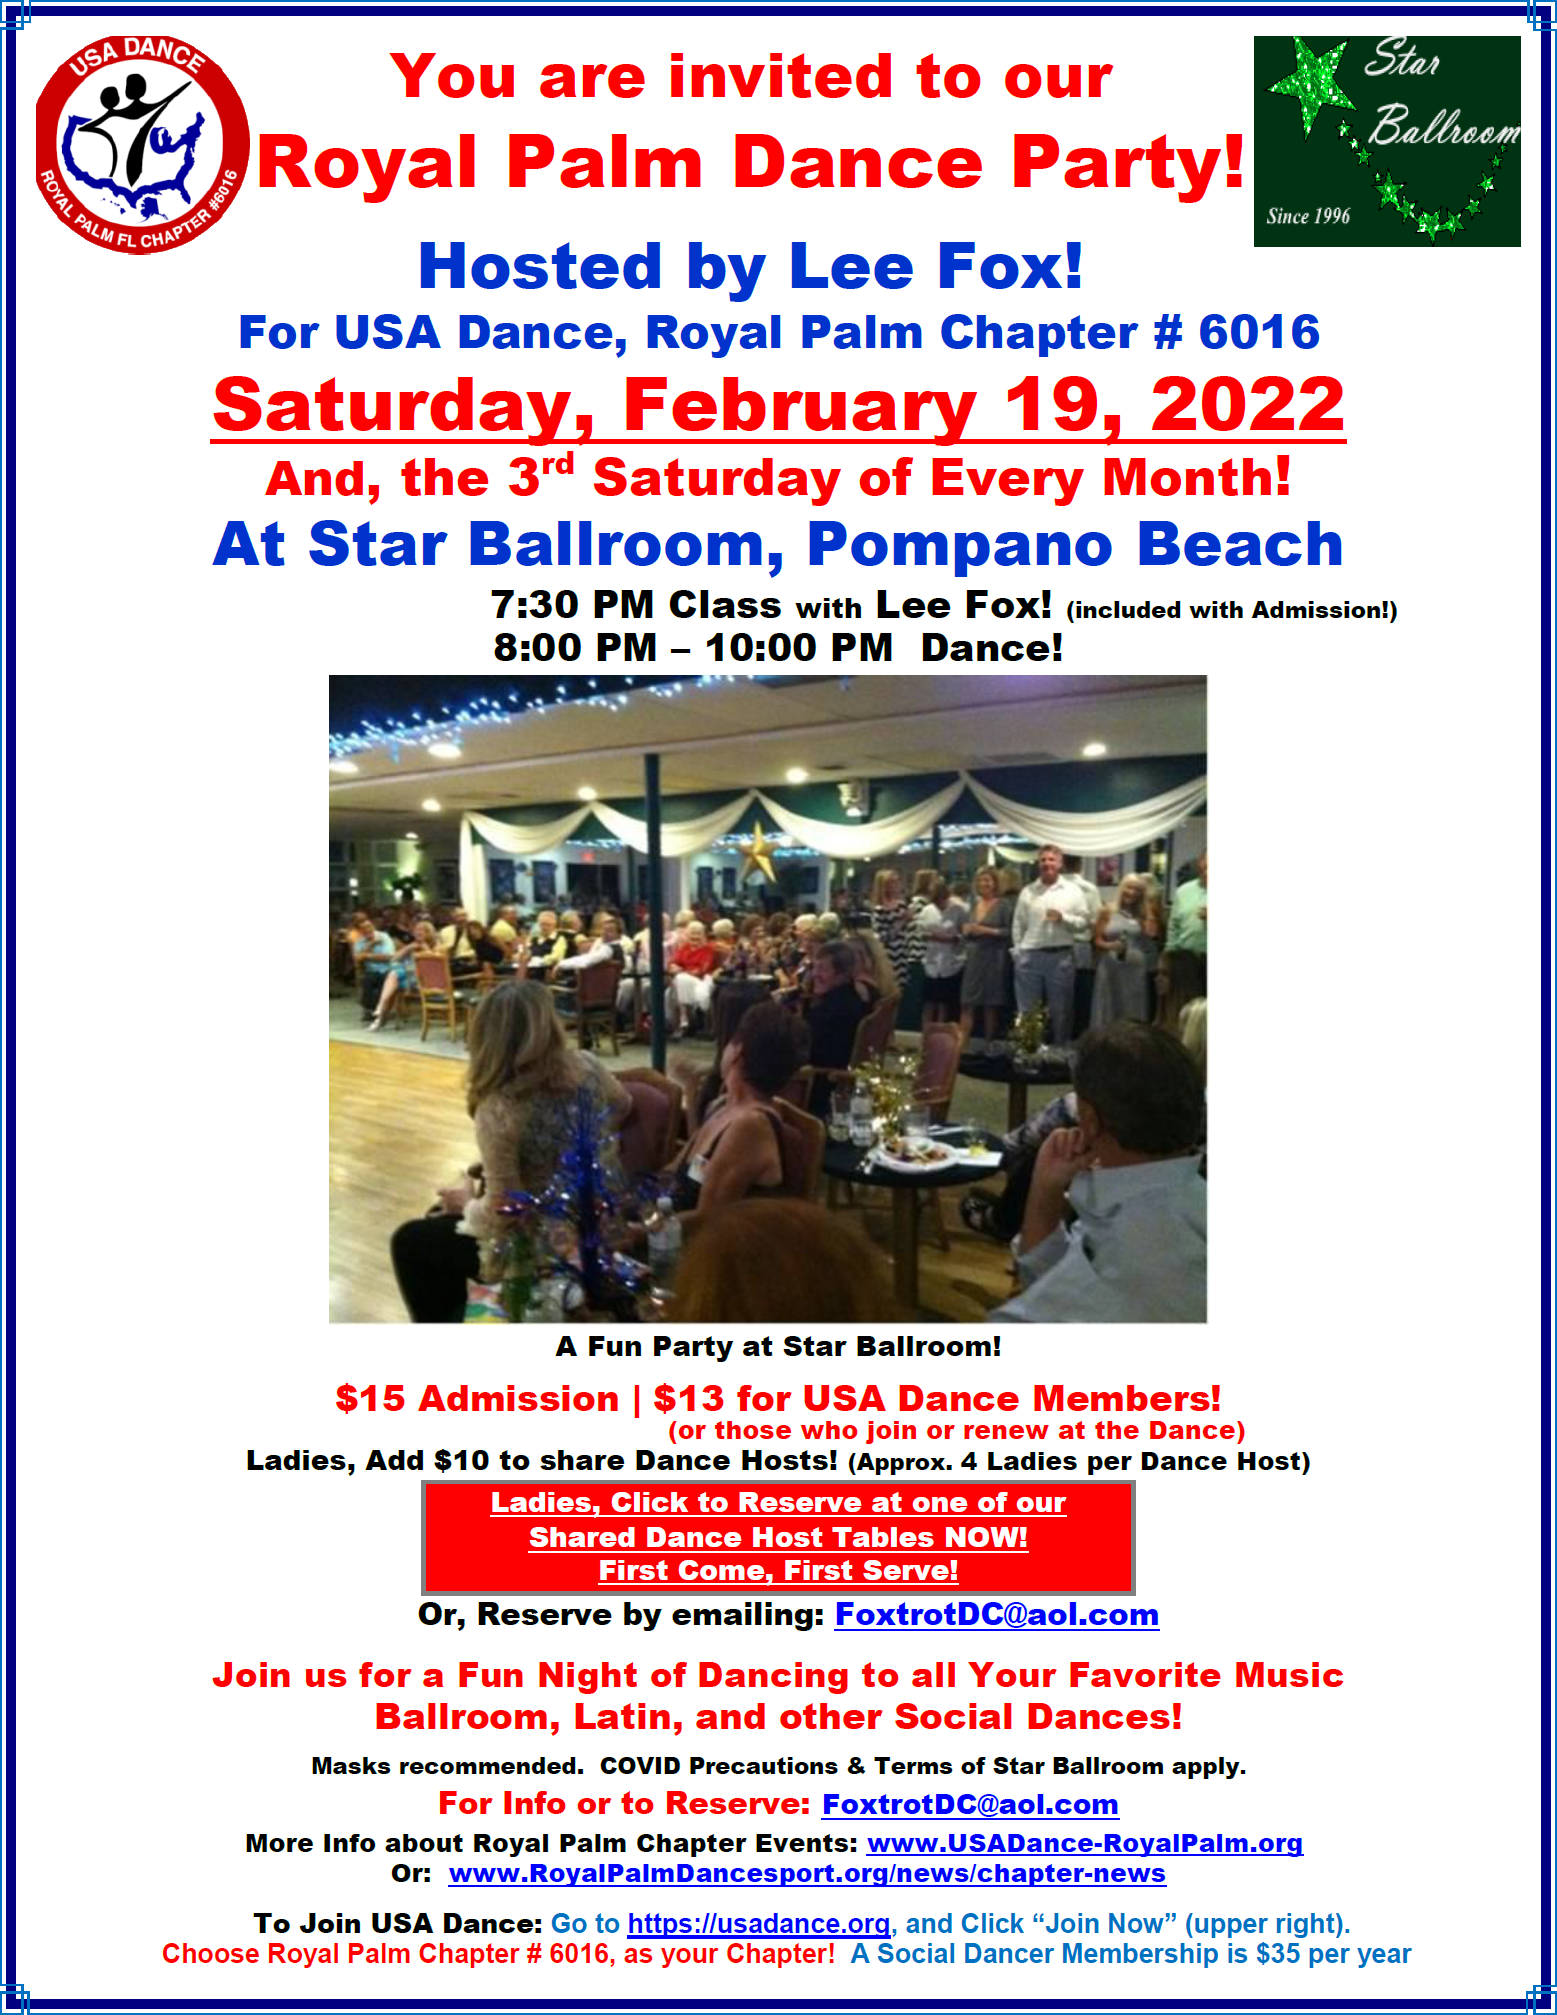 Royal Palm Dance Party - Saturday, February 19, 2022 - Hosted by Lee Fox for USA Dance, Royal Palm Chapter 6016